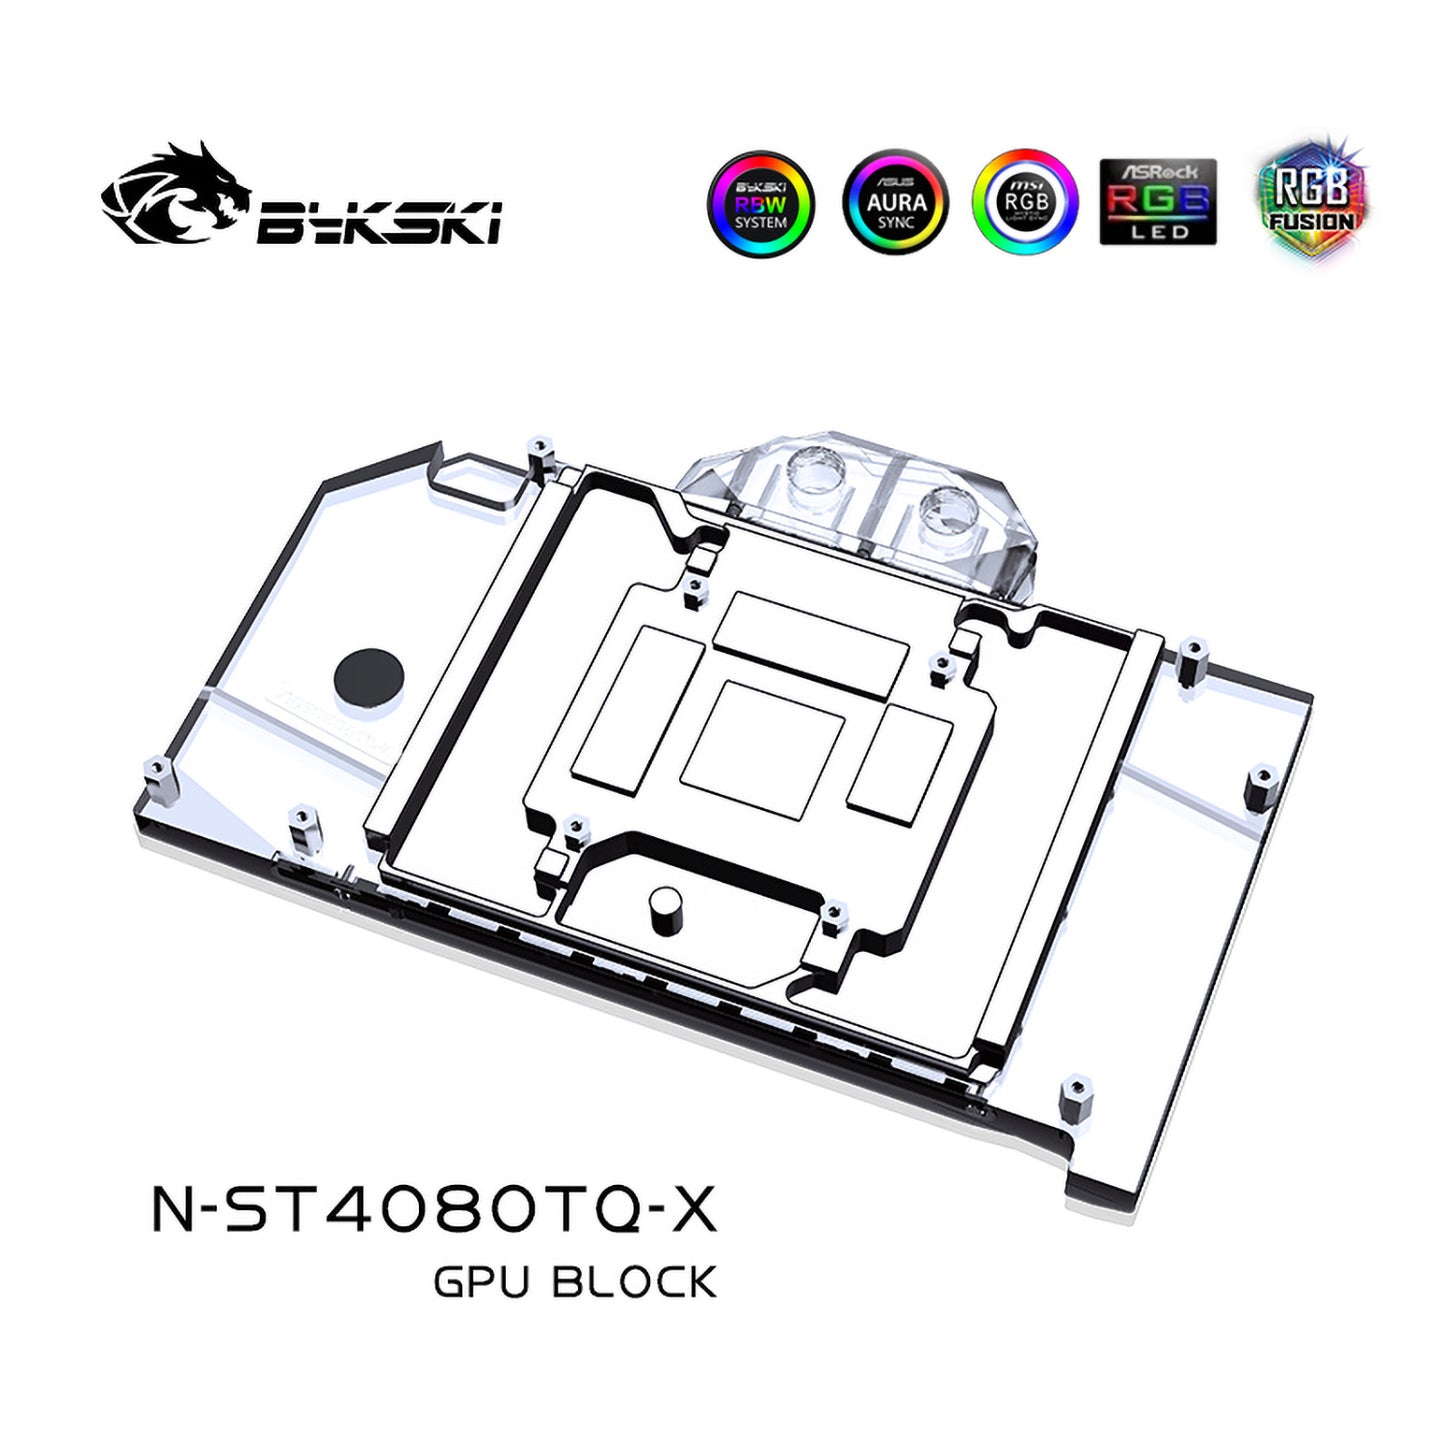 Bykski GPU Water Block For Zotac RTX 4080 Apocalypse / AMP Extreme AIRO / Trinity / 4070 Ti AMP, Full Cover With Backplate PC Water Cooling Cooler, N-ST4080TQ-X